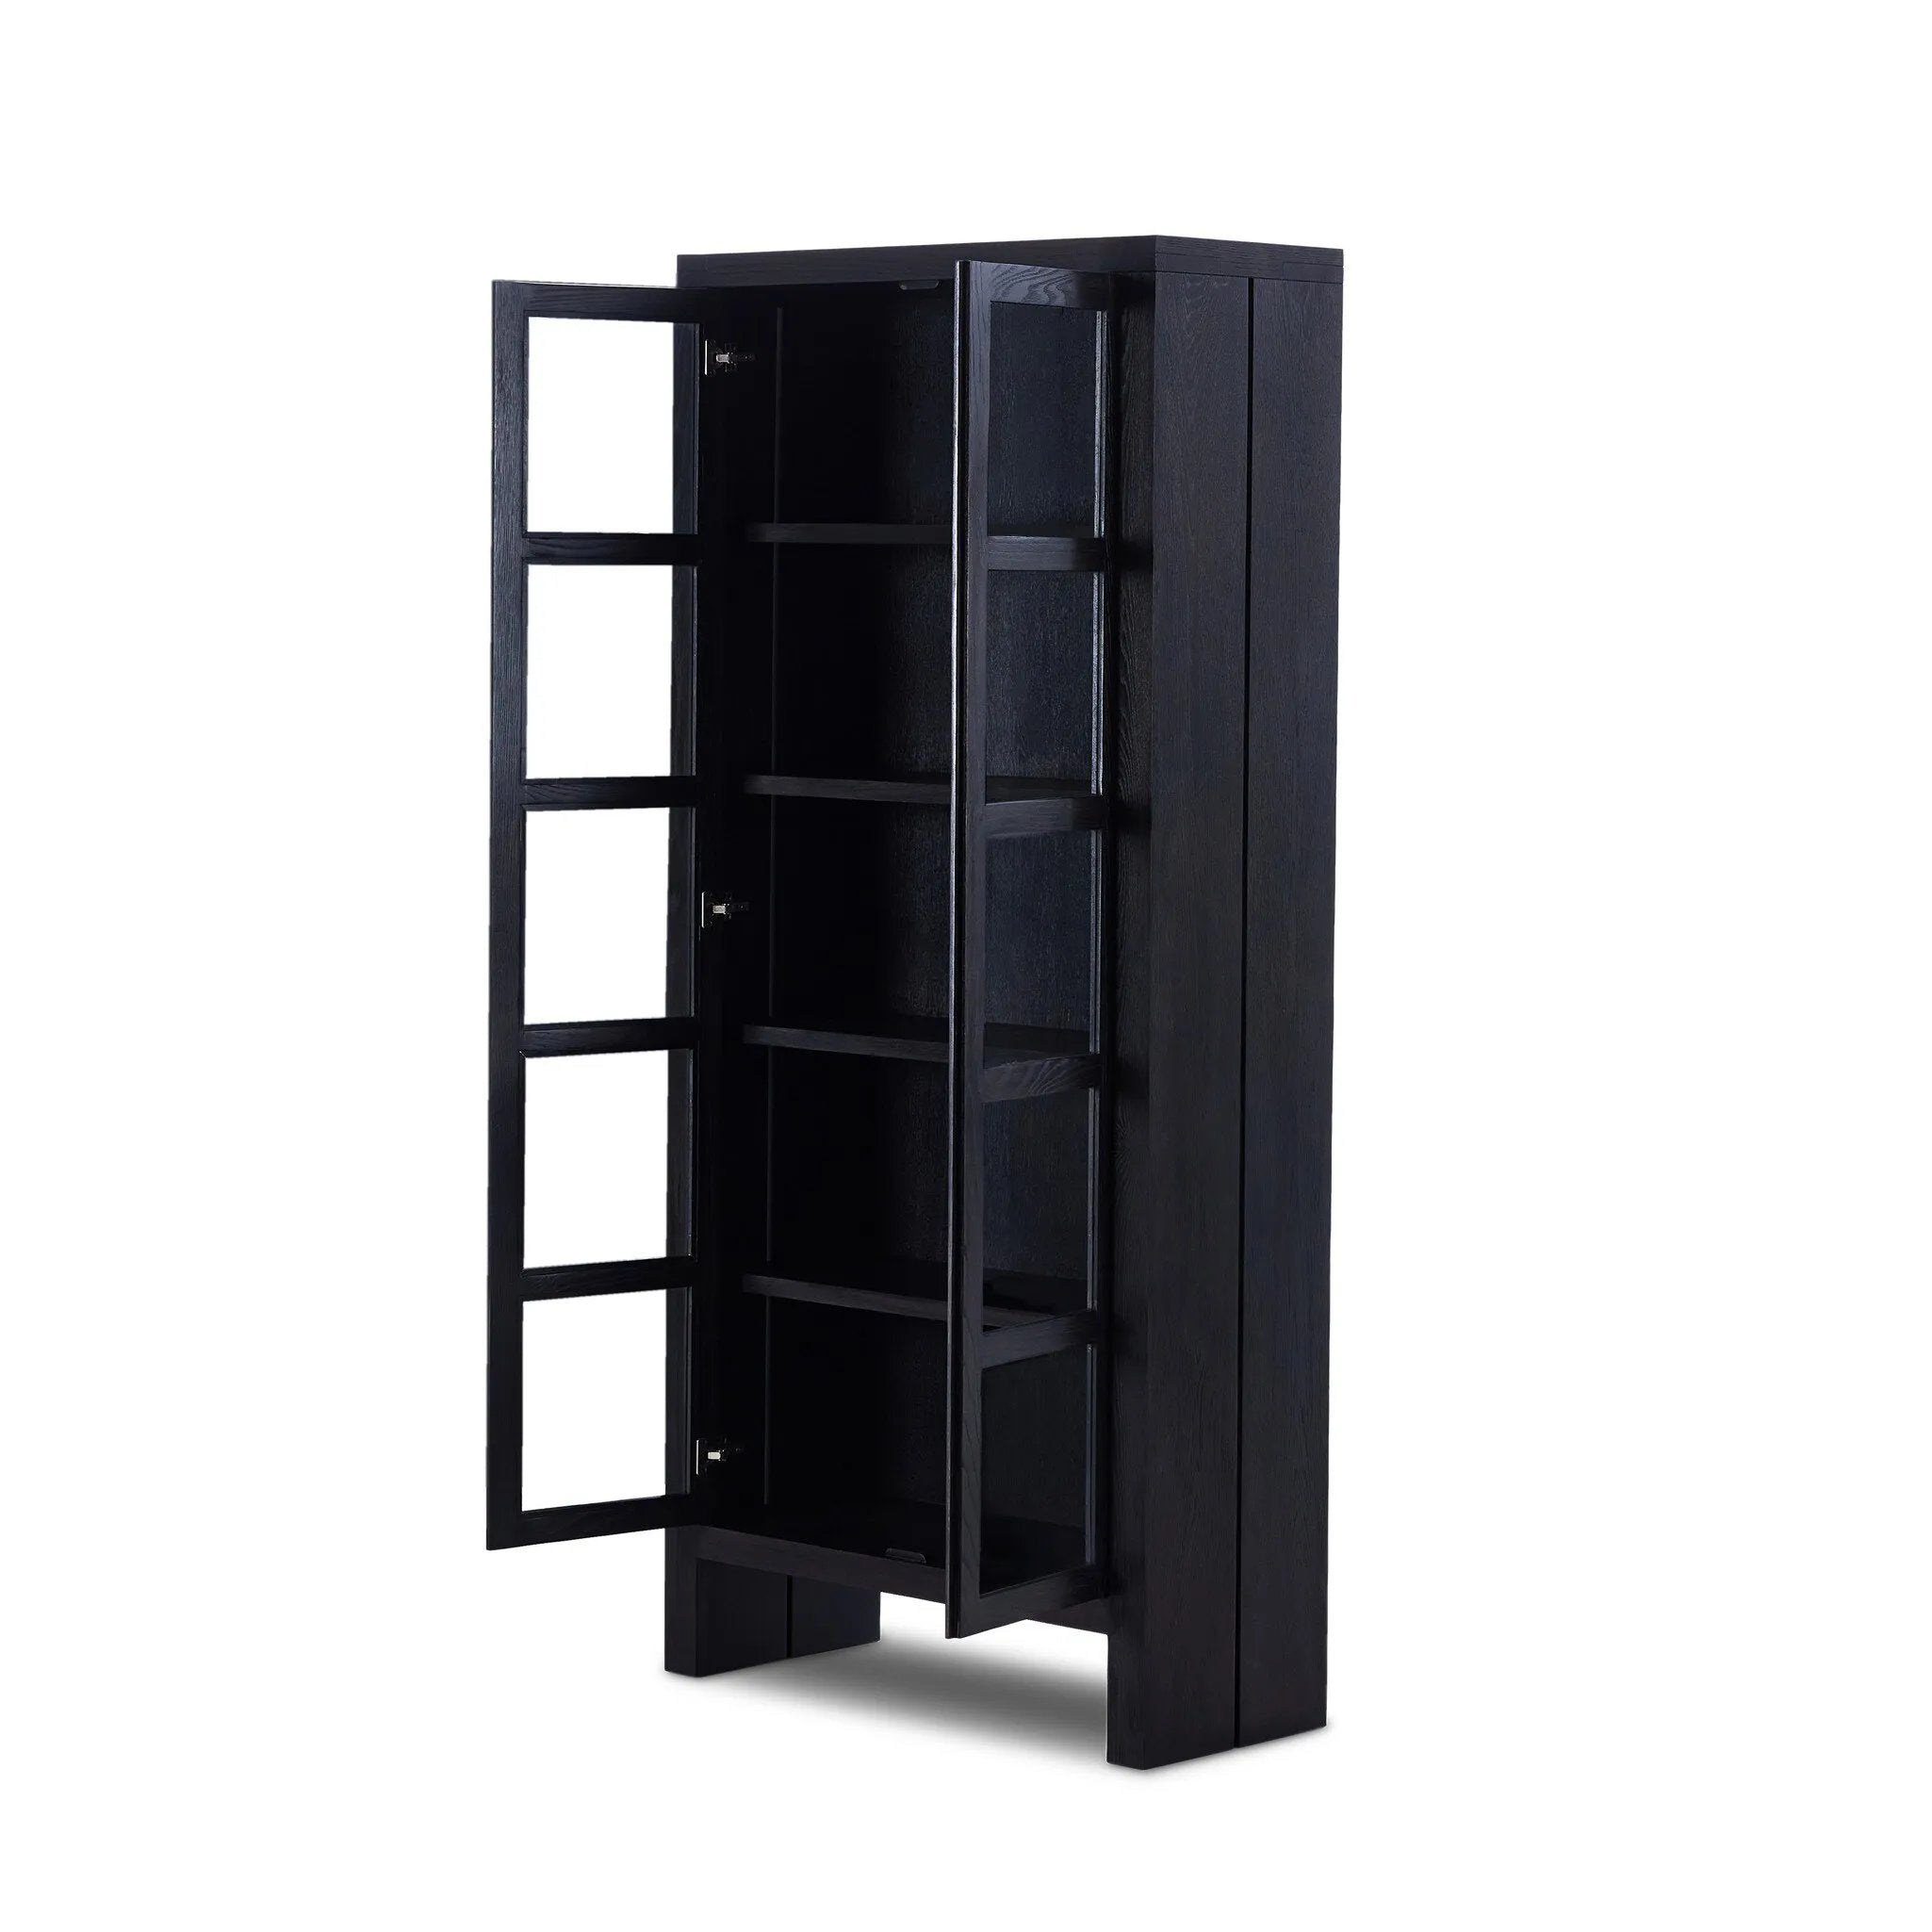 This minimal-inspired bookcase is crafted from a mix of solid oak and worn black veneer. Featuring glass-front doors and spacious shelves for storage and display.Collection: Bennet Amethyst Home provides interior design, new home construction design consulting, vintage area rugs, and lighting in the Park City metro area.